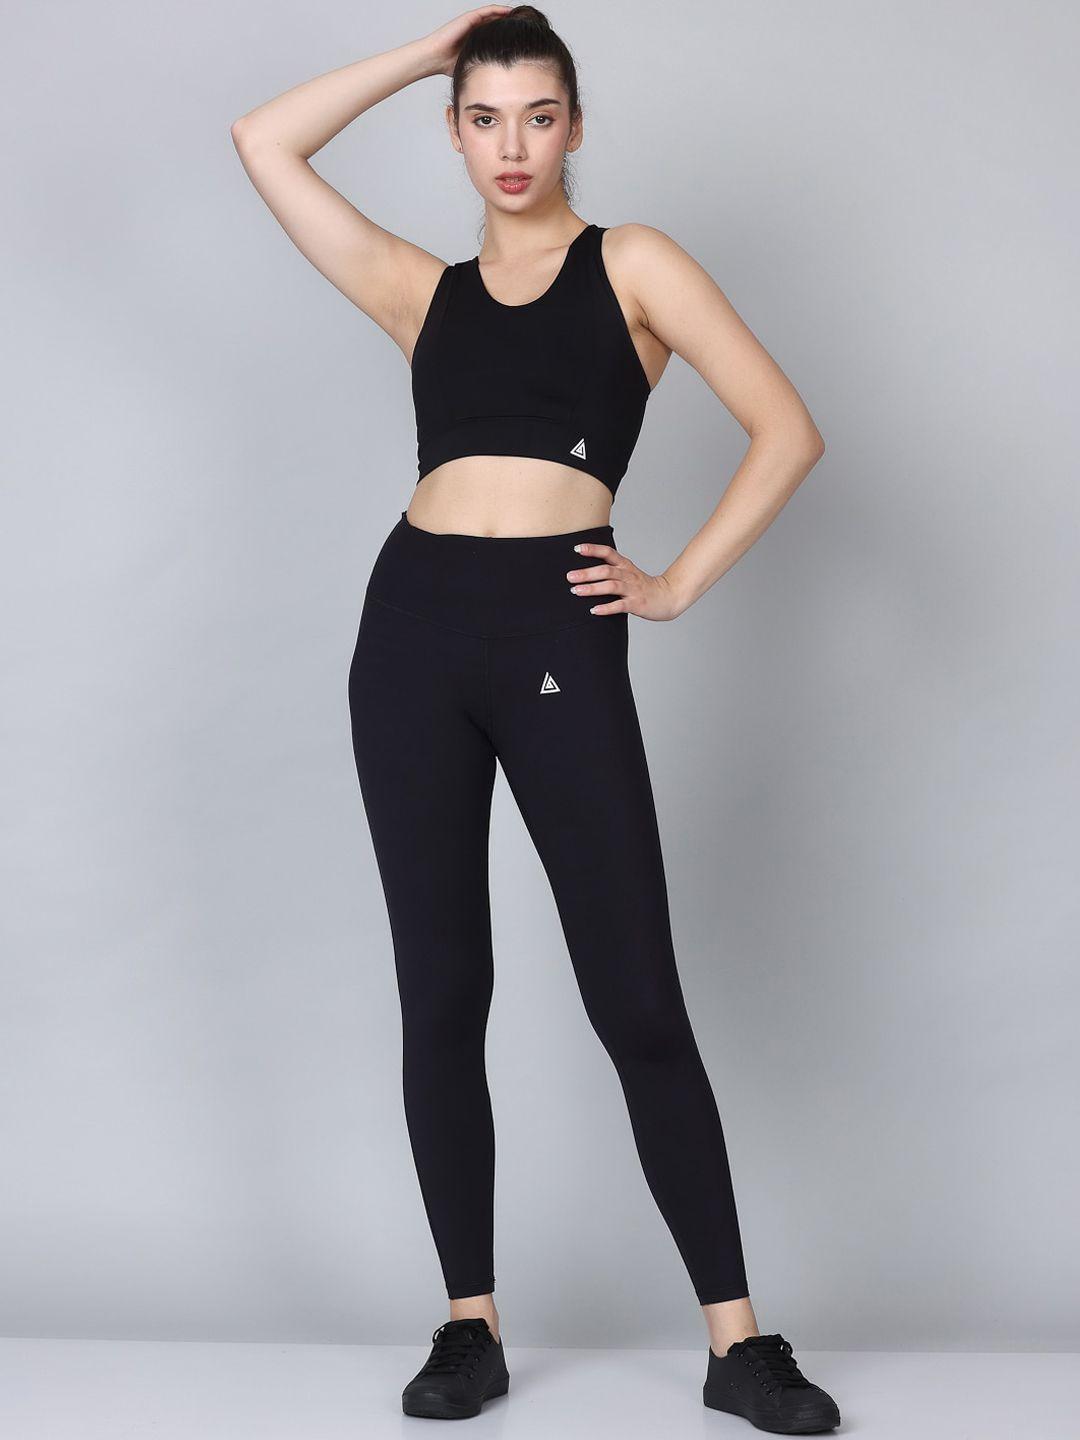 aesthetic sports bra with leggings co-ords